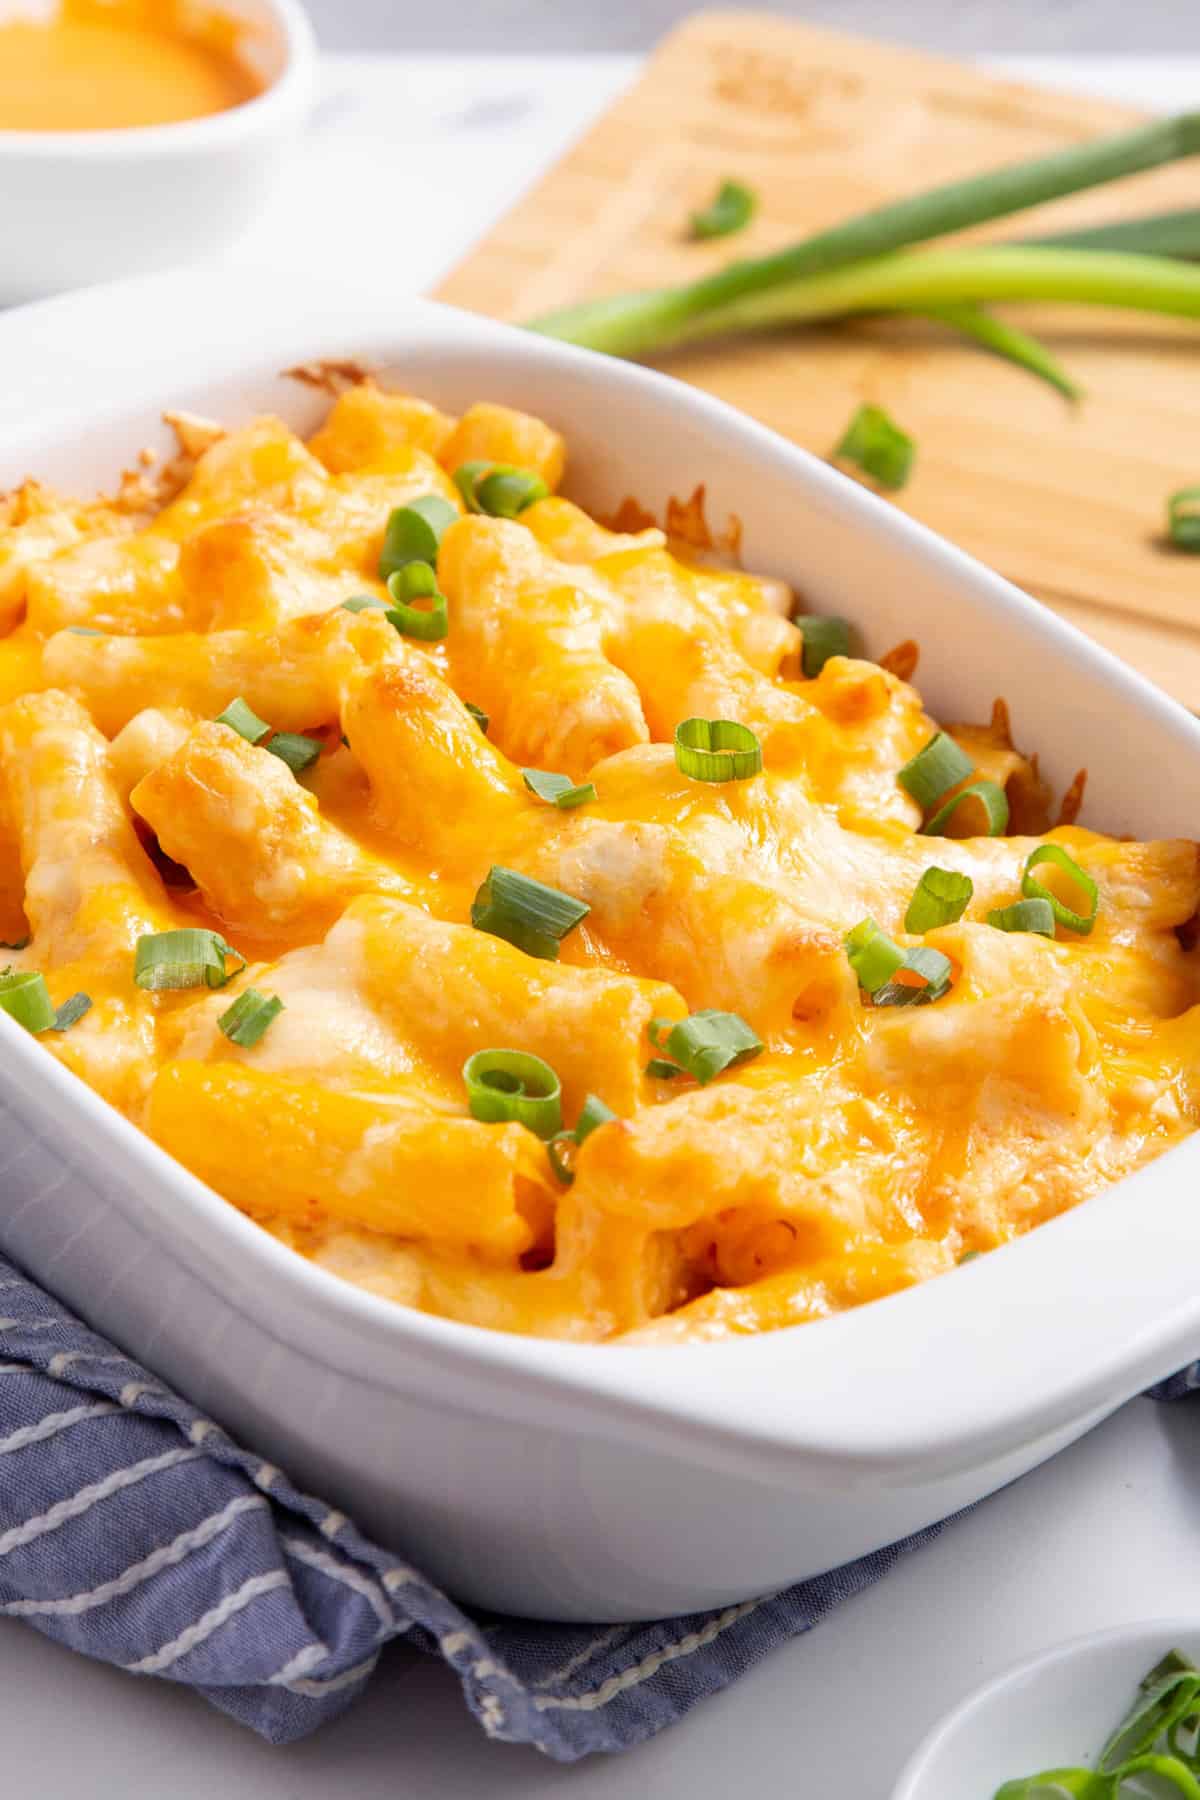 Buffalo chicken casserole served in a casserole fish topped with chopped green onions